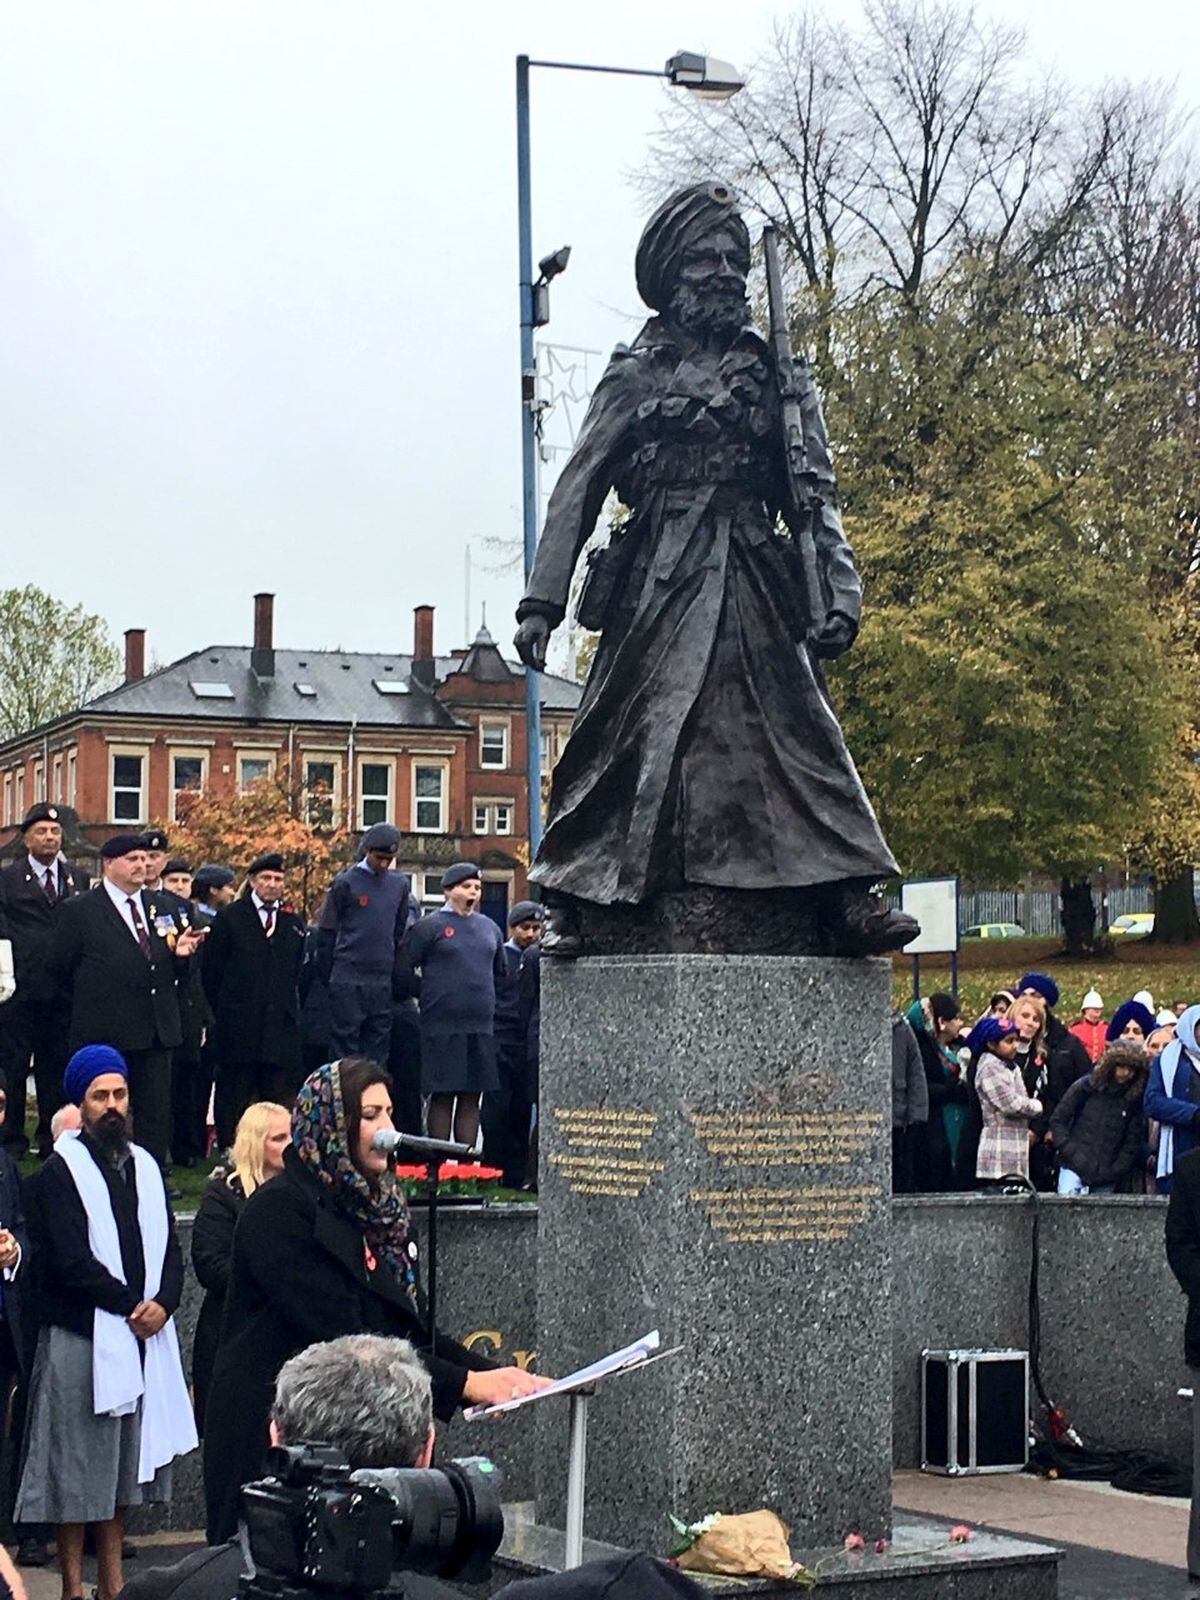 The Lions of the Great War memorial in Smethwick in 2018